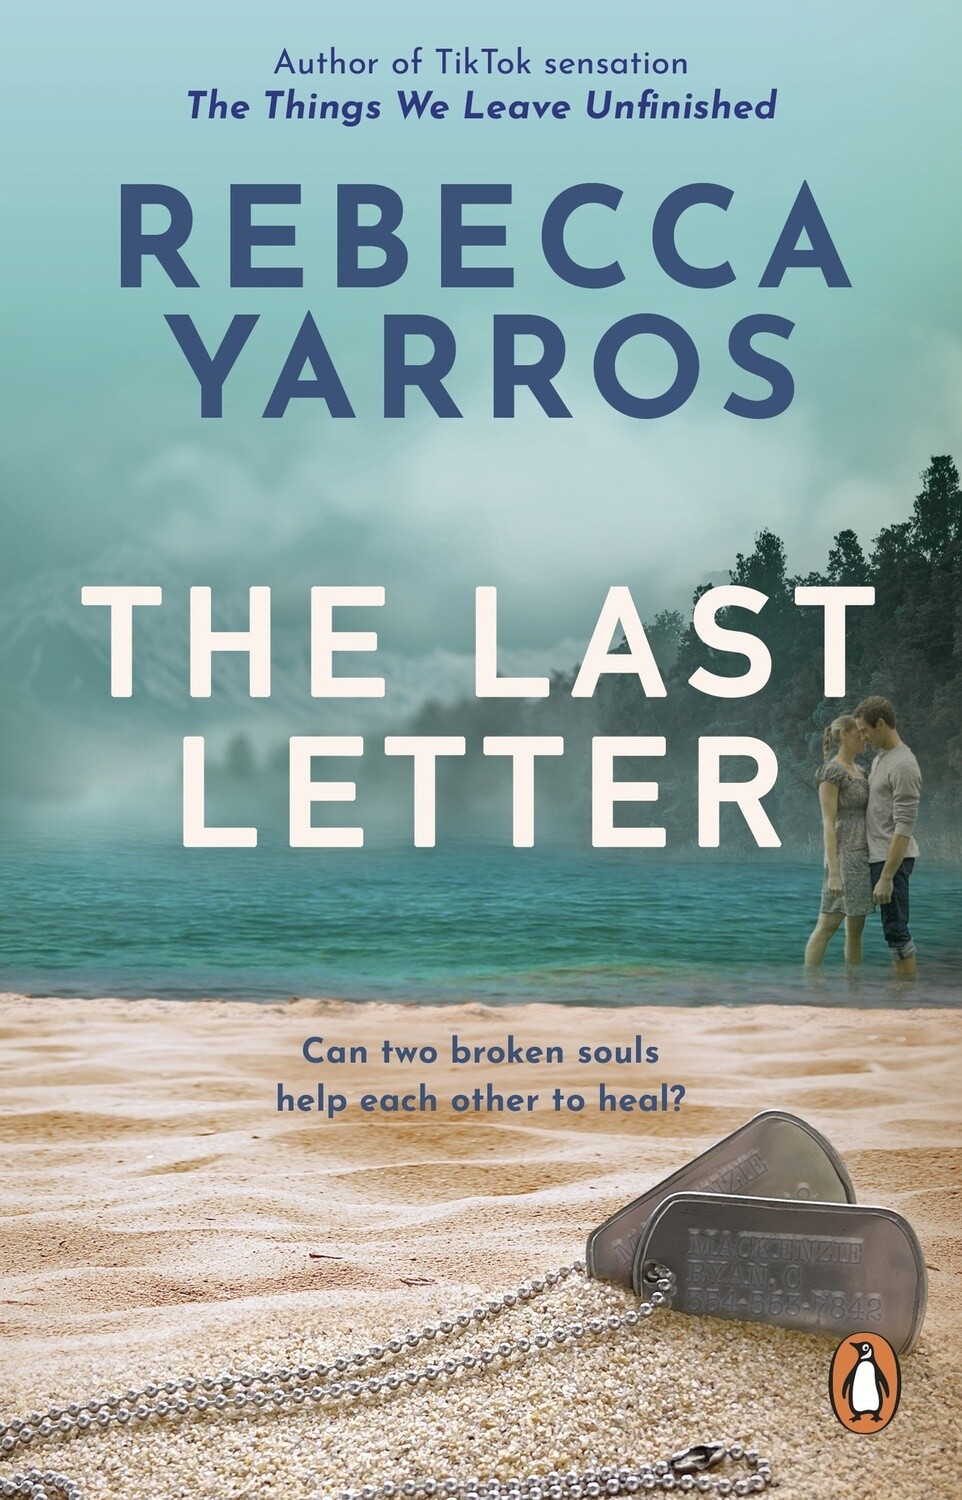 The Last Letter by Rebecca Yarros